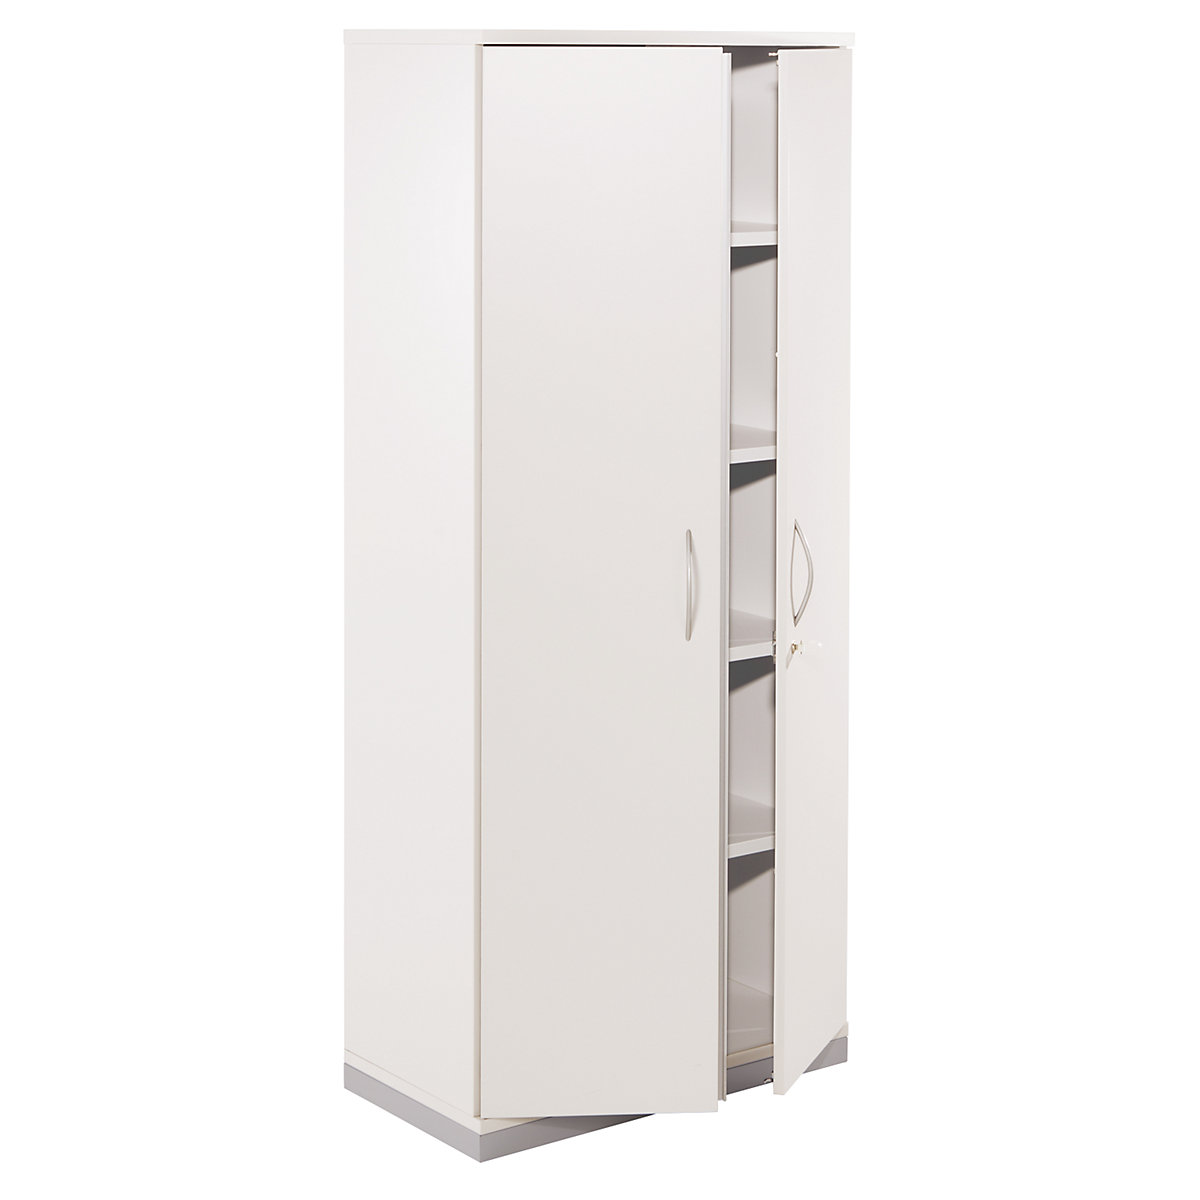 Double door cupboard THEA, 4 shelves, 5 file heights, antique white-5